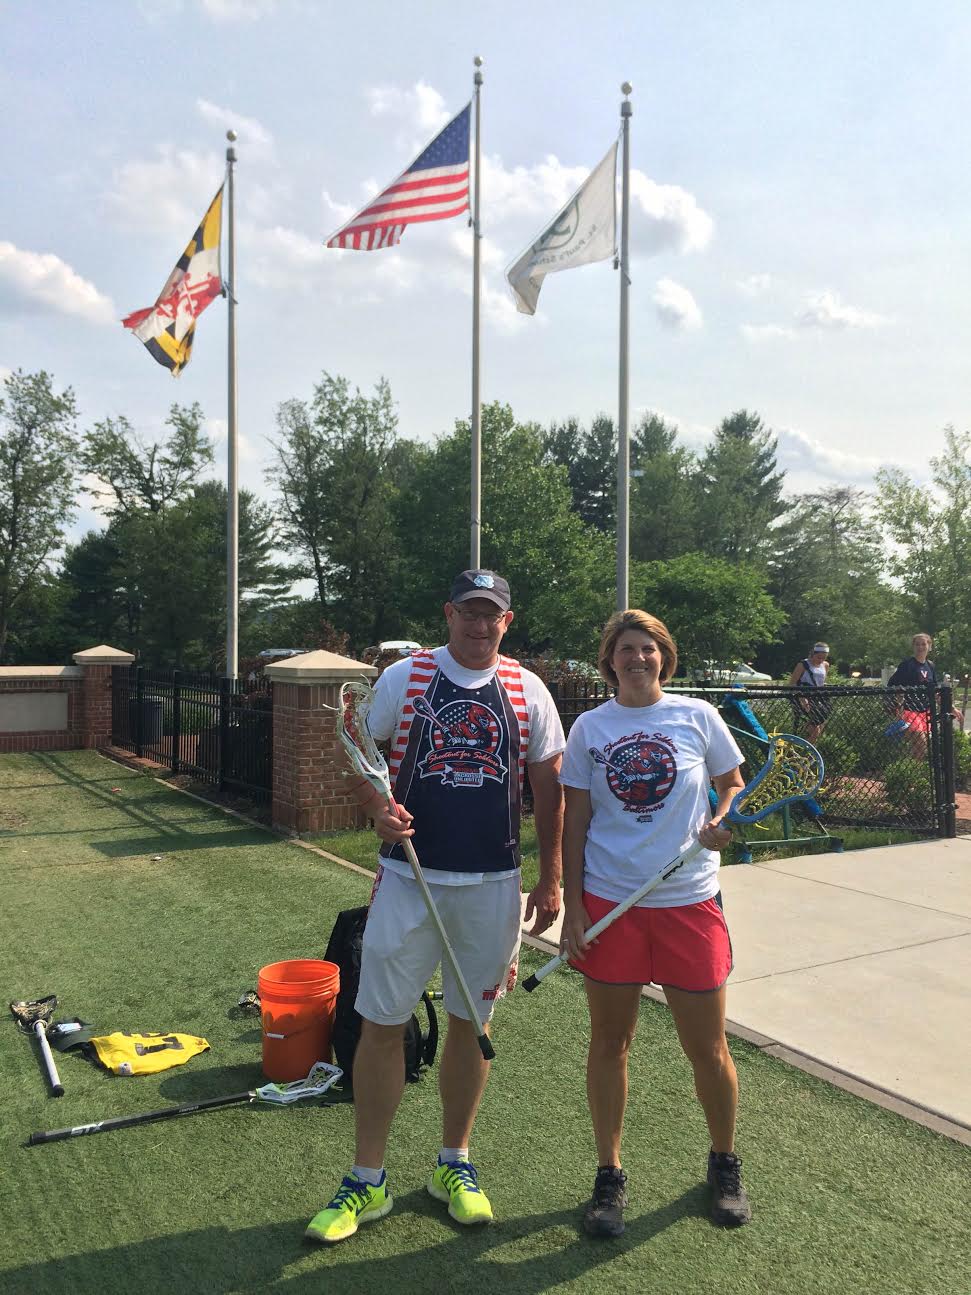 2  Philanthropists, 24 Hours, $50,000 Fundraised: Chris McGovern and Michelle Railey Go All-In for the Wounded Warrior Project